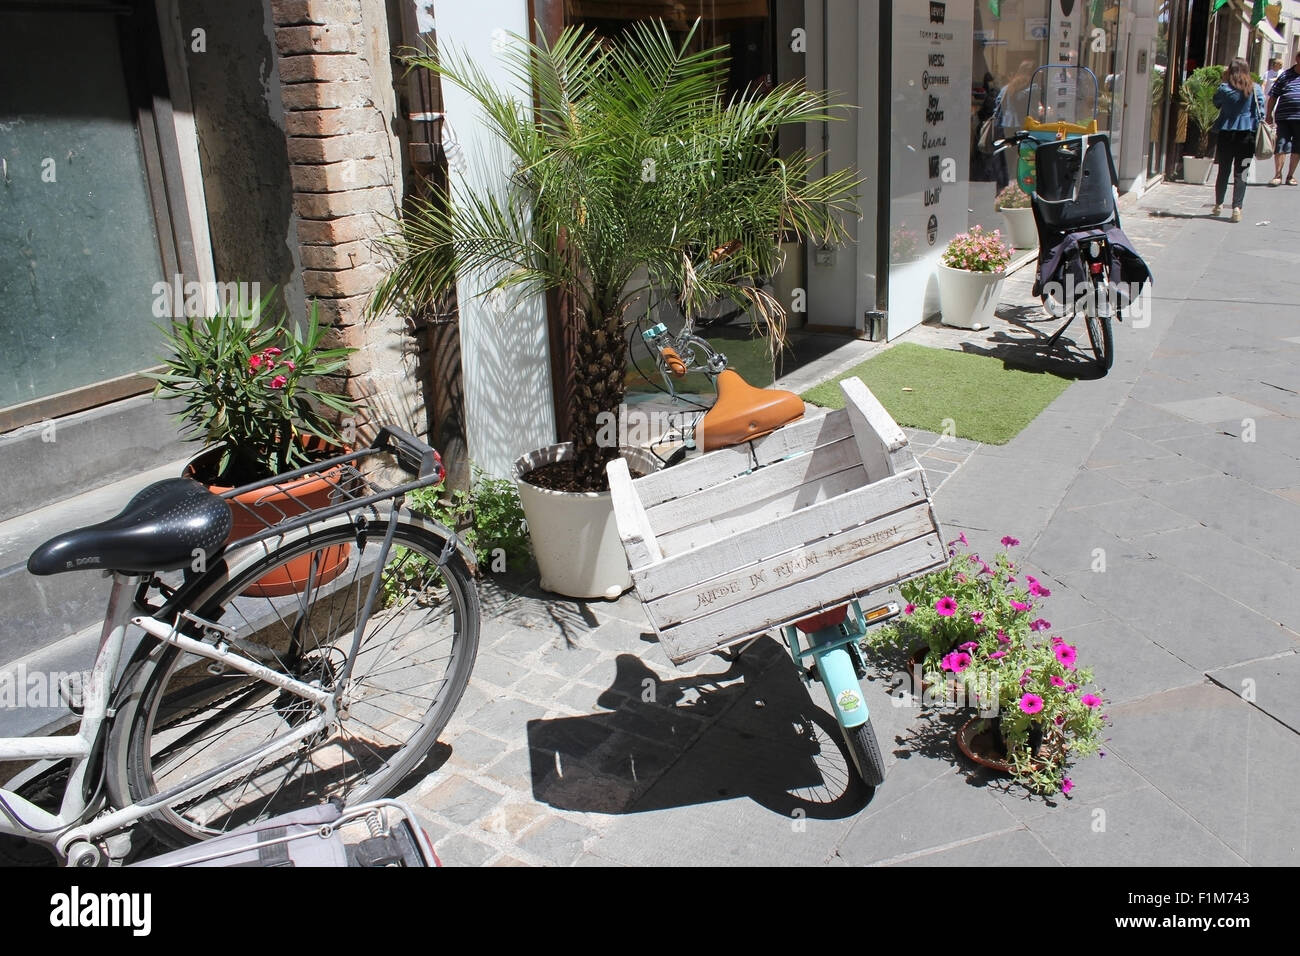 MILAN, ITALY - JUNE 24, 2015: The Italian cargo bicycles on the street of old Milan. The Italian bicycles are considered the bes Stock Photo